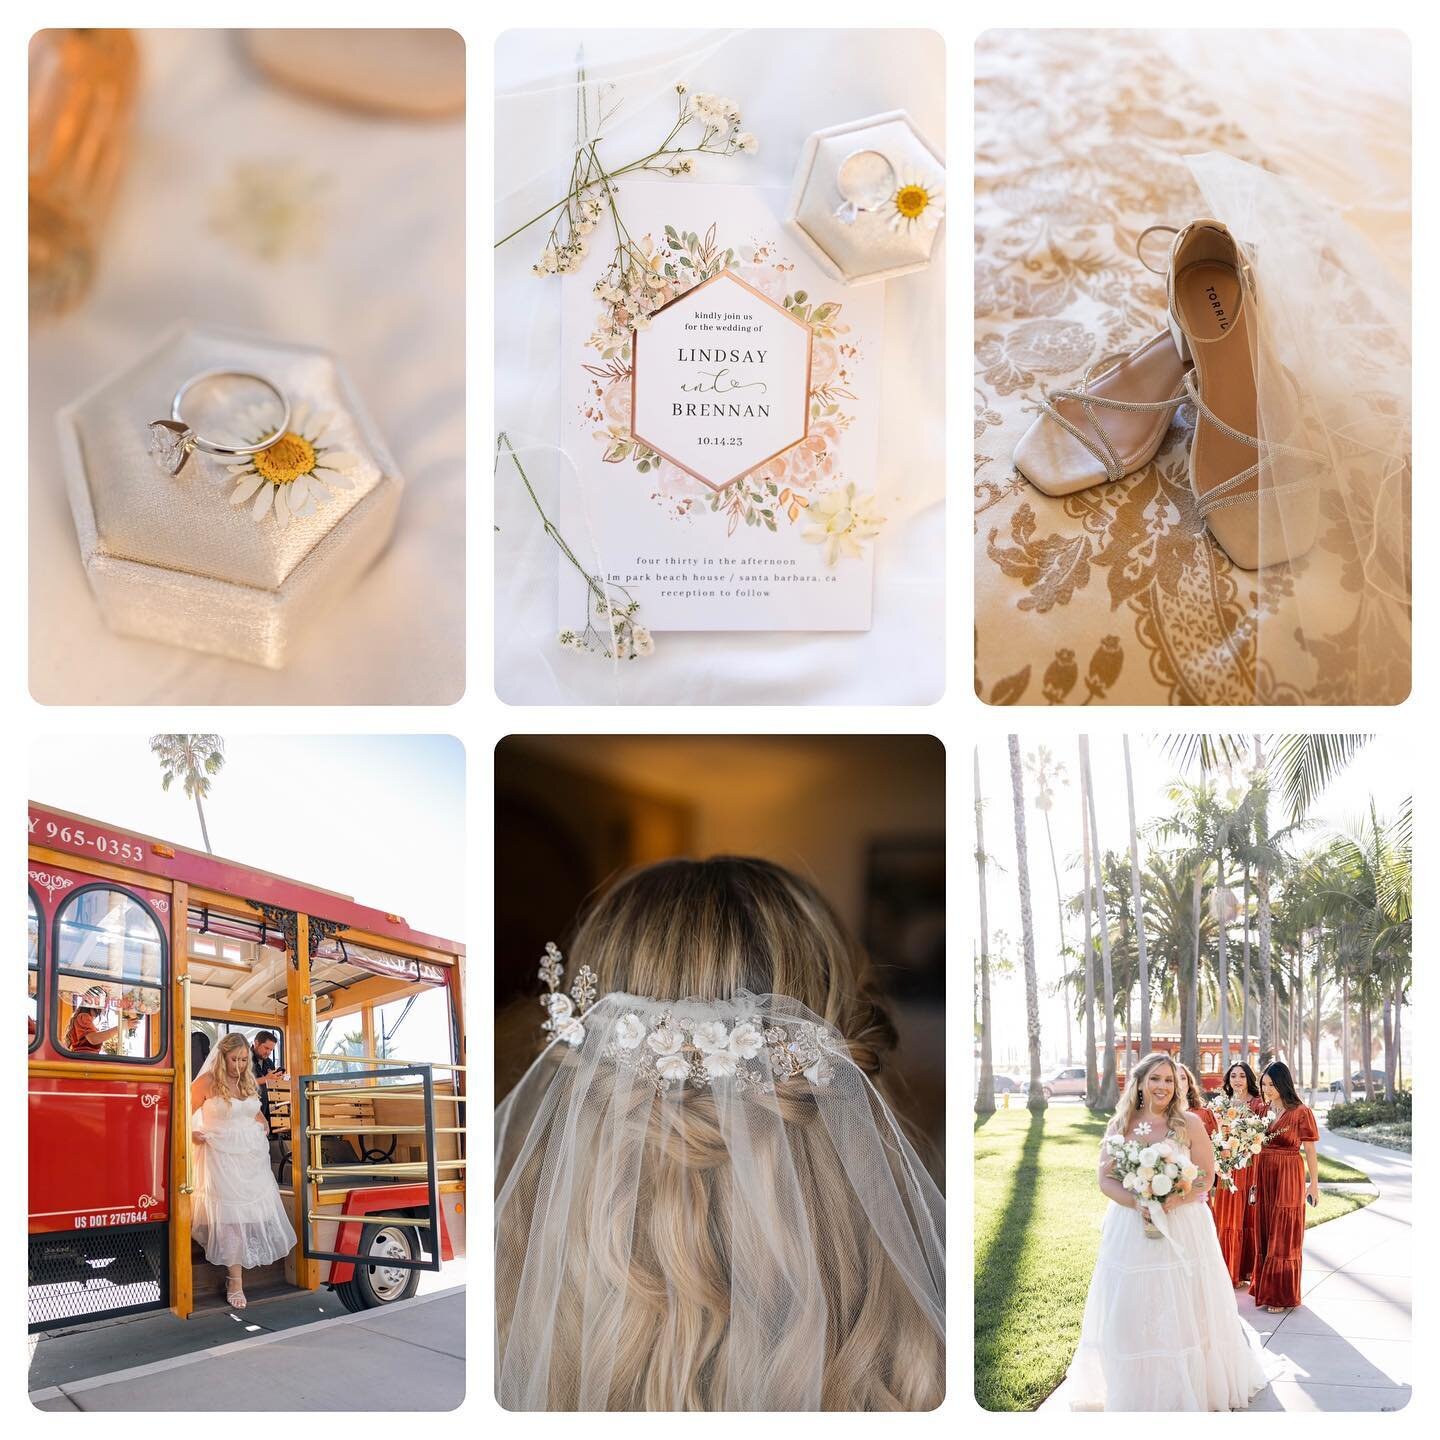 Lindsay and Brennan, the perfect day. We started at @santabarbarainn , then we went on over to the beach for a beautiful ceremony with loved ones. We ended the night with a perfect dinner and reception at Palm Park Beach House.

It was a day truly fo